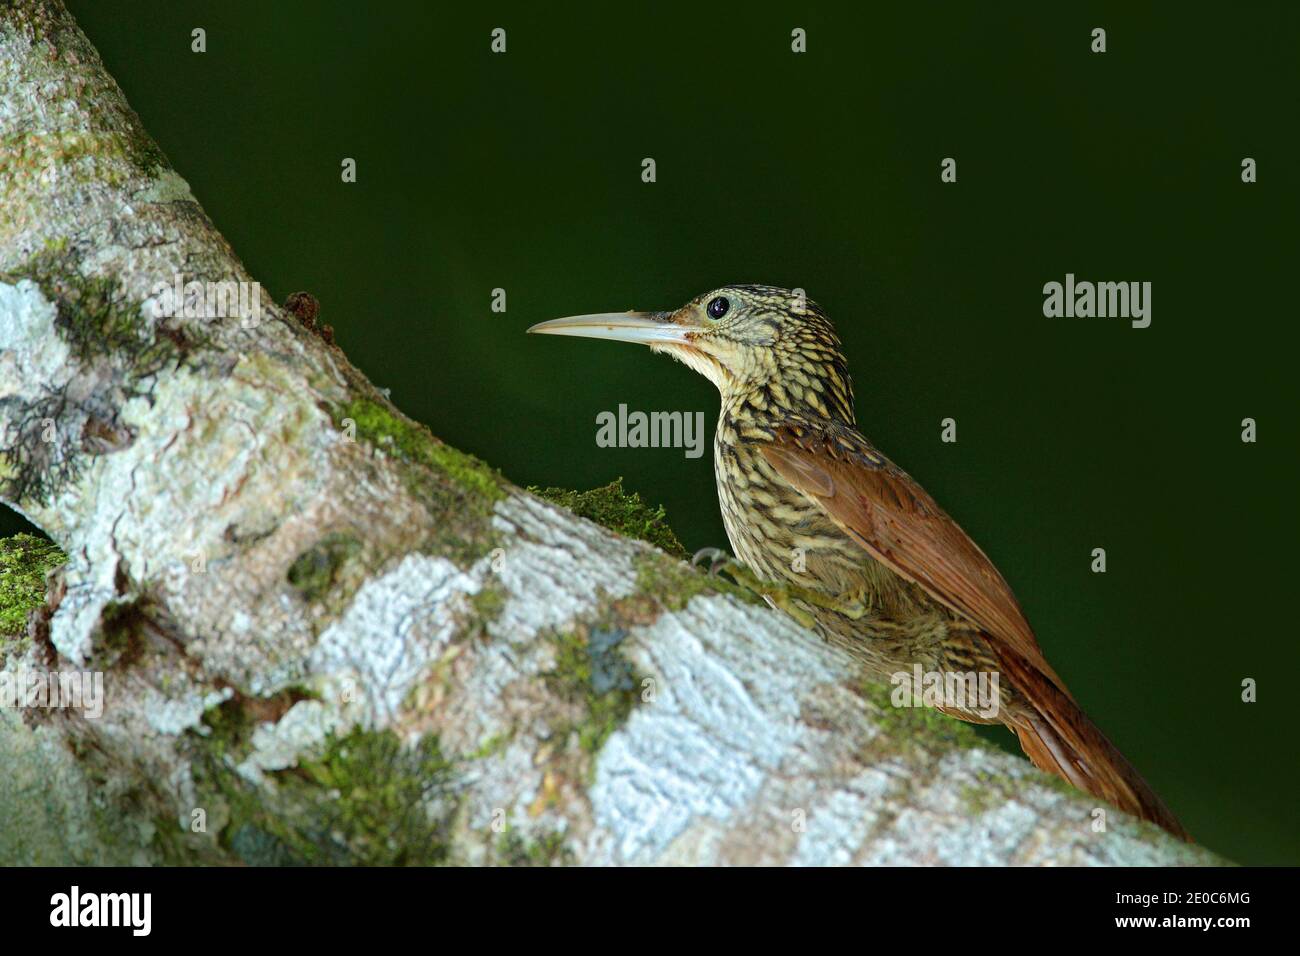 Ivory-billed woodcreeper, Xiphorhynchus flavigaster, exotic tropical brawn bird from Costa Rica. Tanager from tropic forest. Close-up portrait of nice Stock Photo